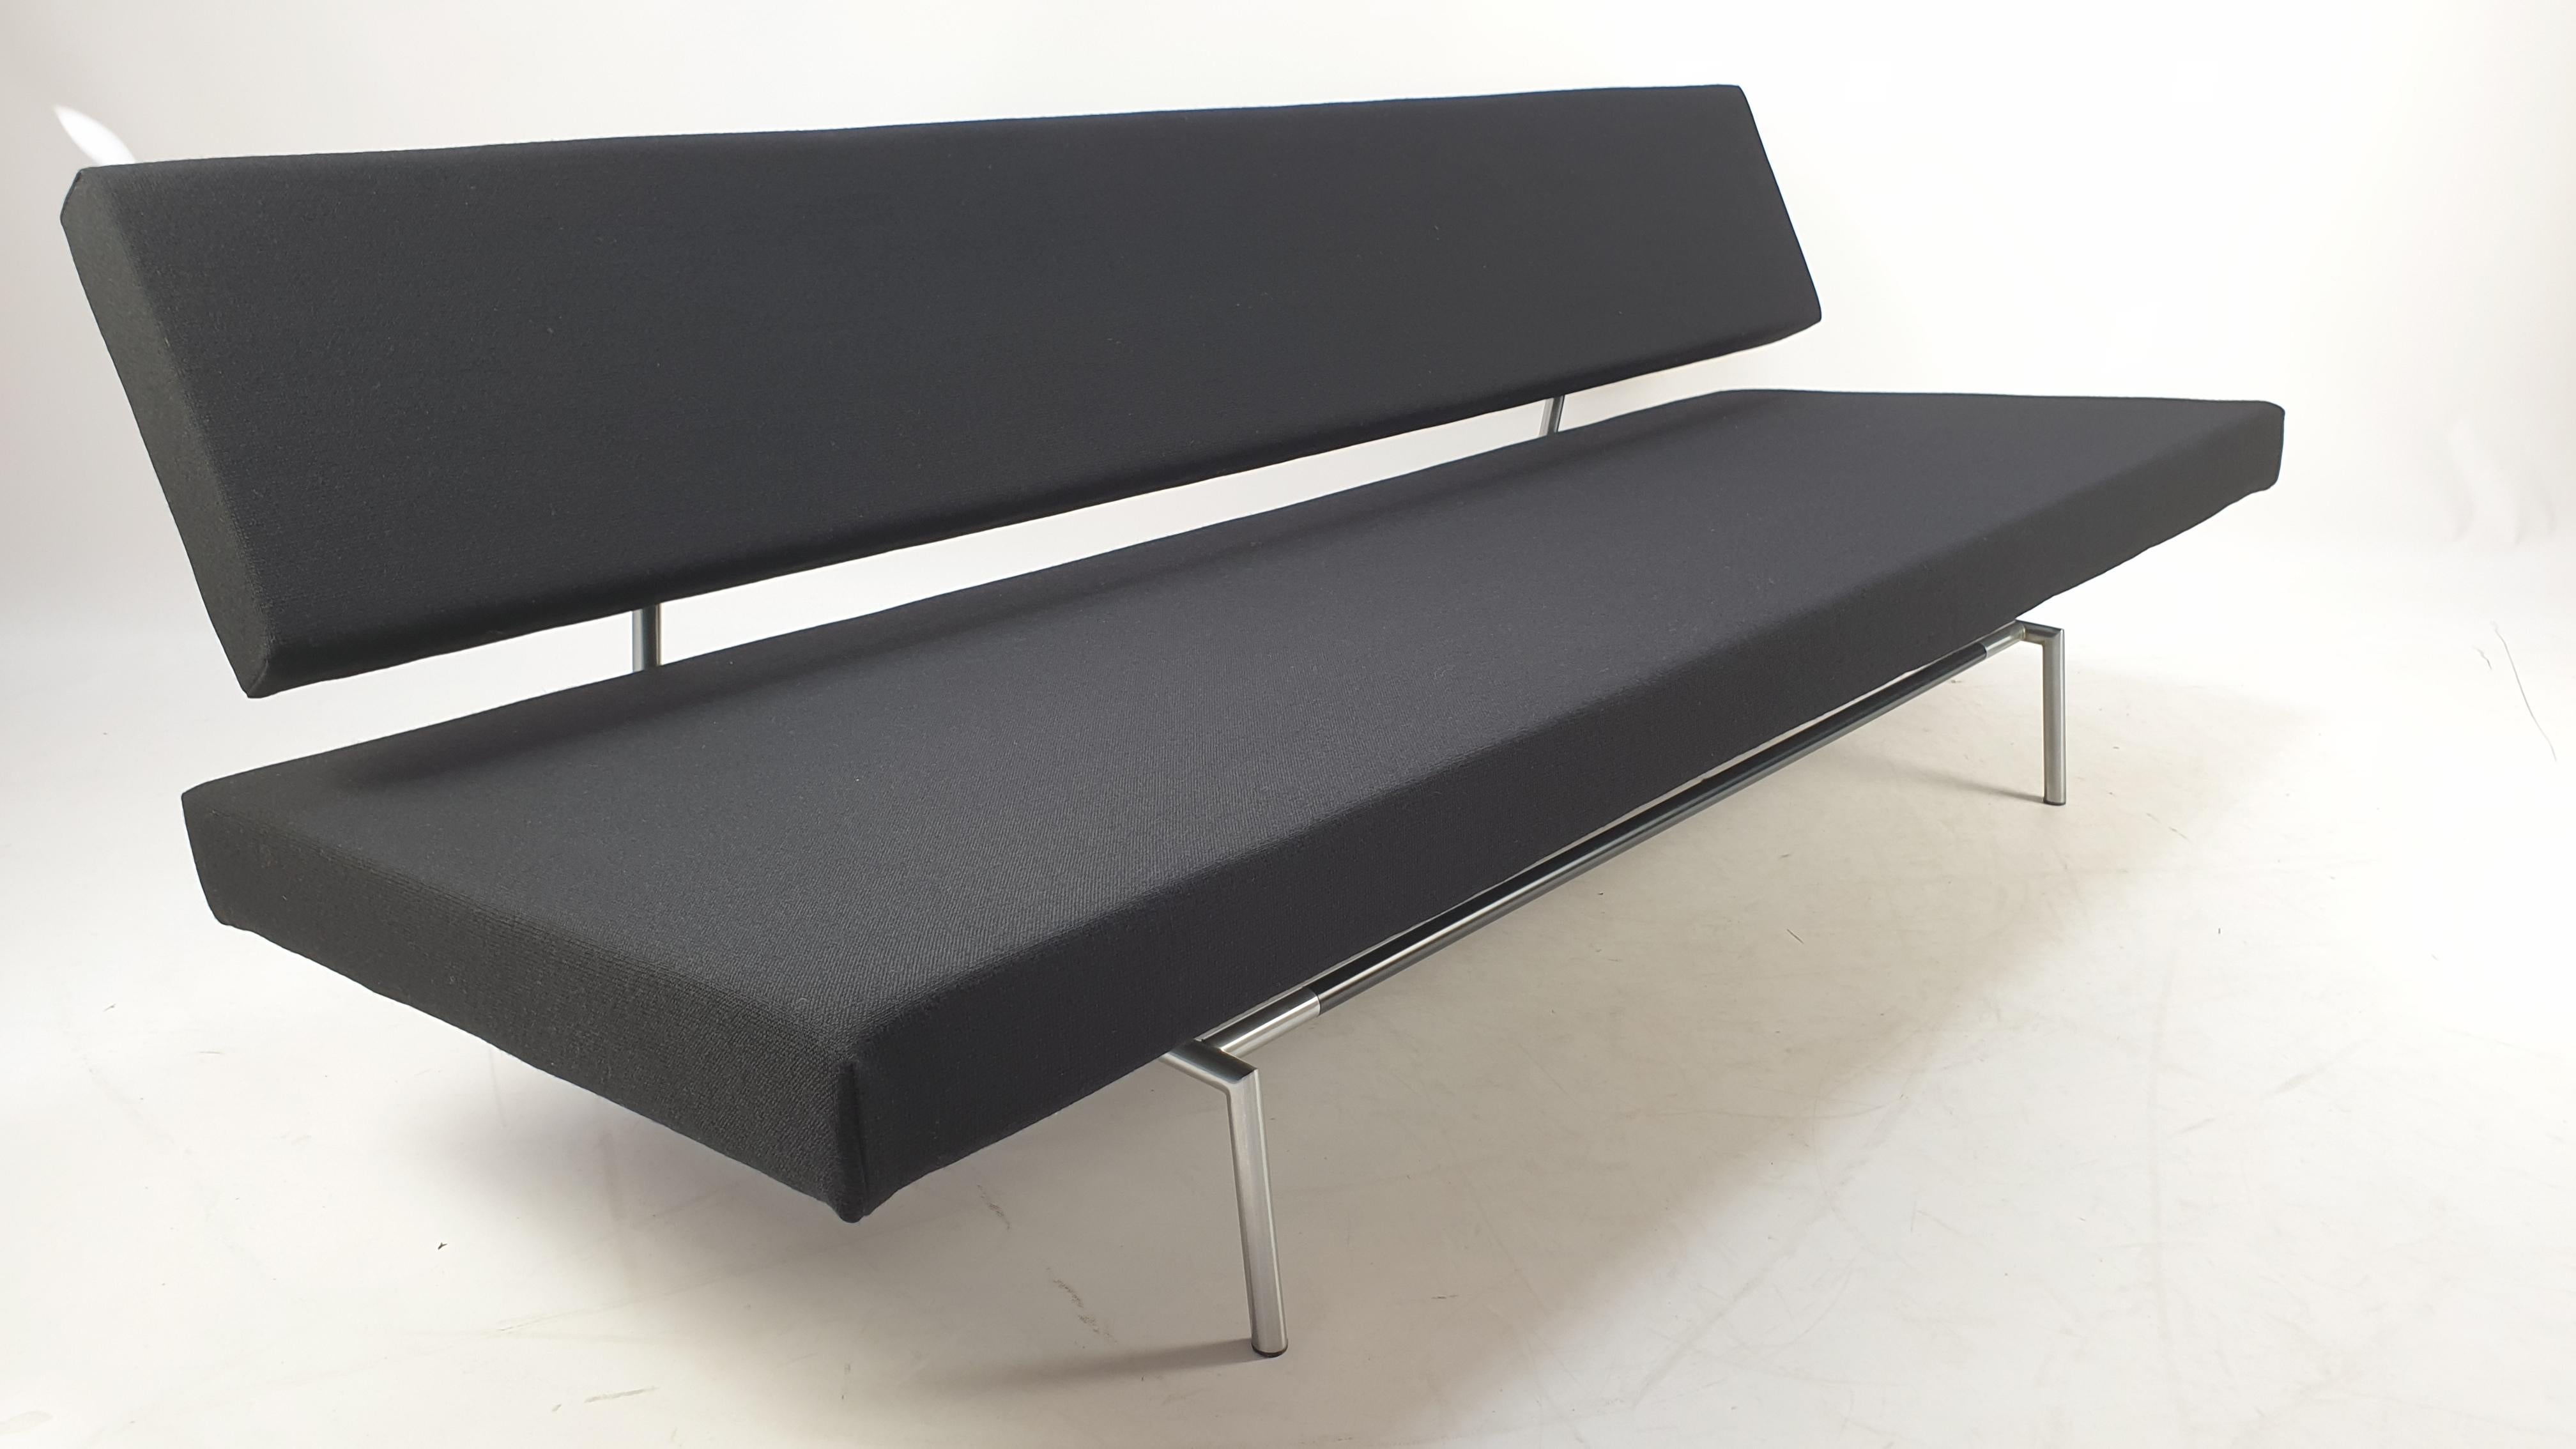 Sleeping sofa, designed by the famous Martin Visser in the 60's. Fabricated by 't Spectrum, The Netherlands. 
This is the BR02 edition, with round feet. 

Simple high quality metal structure with maximum comfort. 

Just restored with new foam